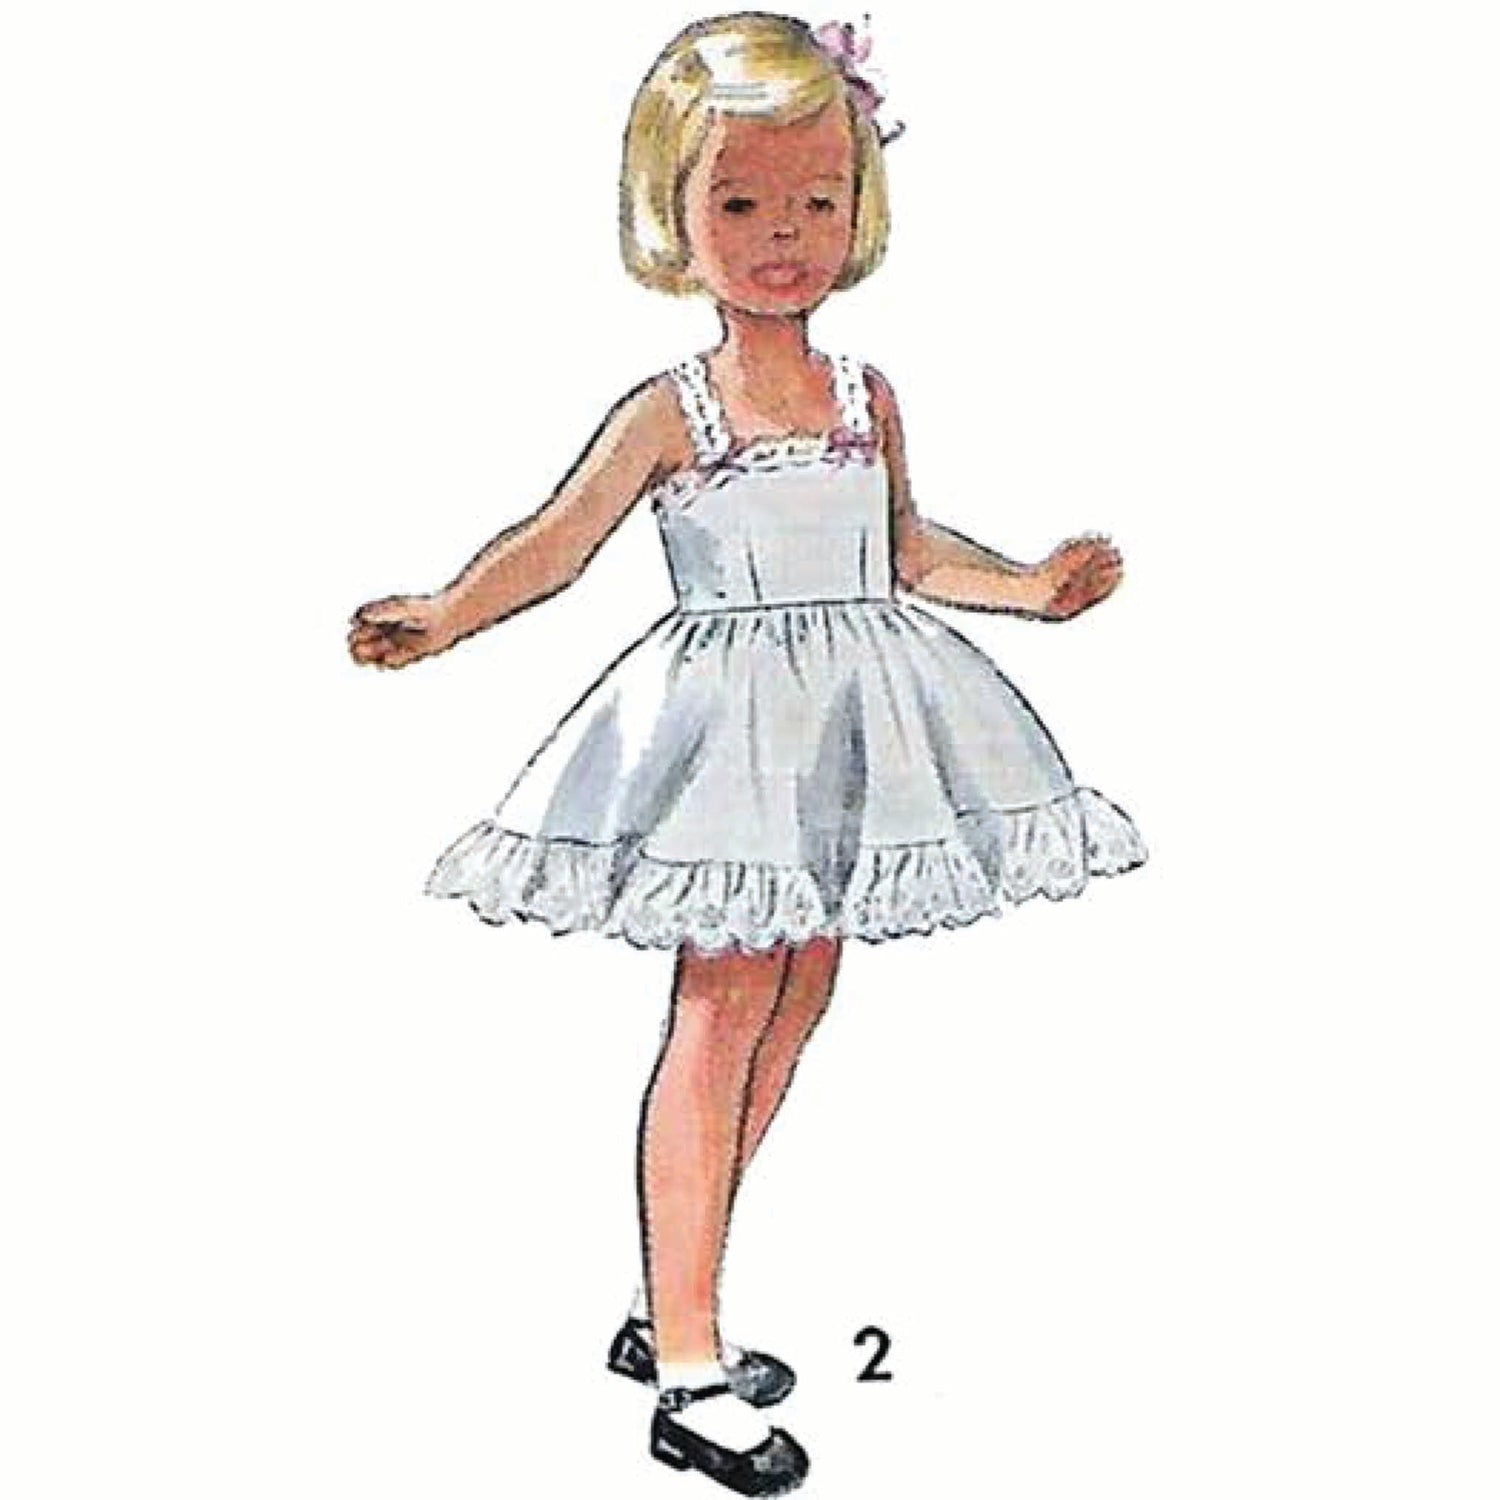 Child wearing slip dresses made using sewing pattern Simplicity 3296